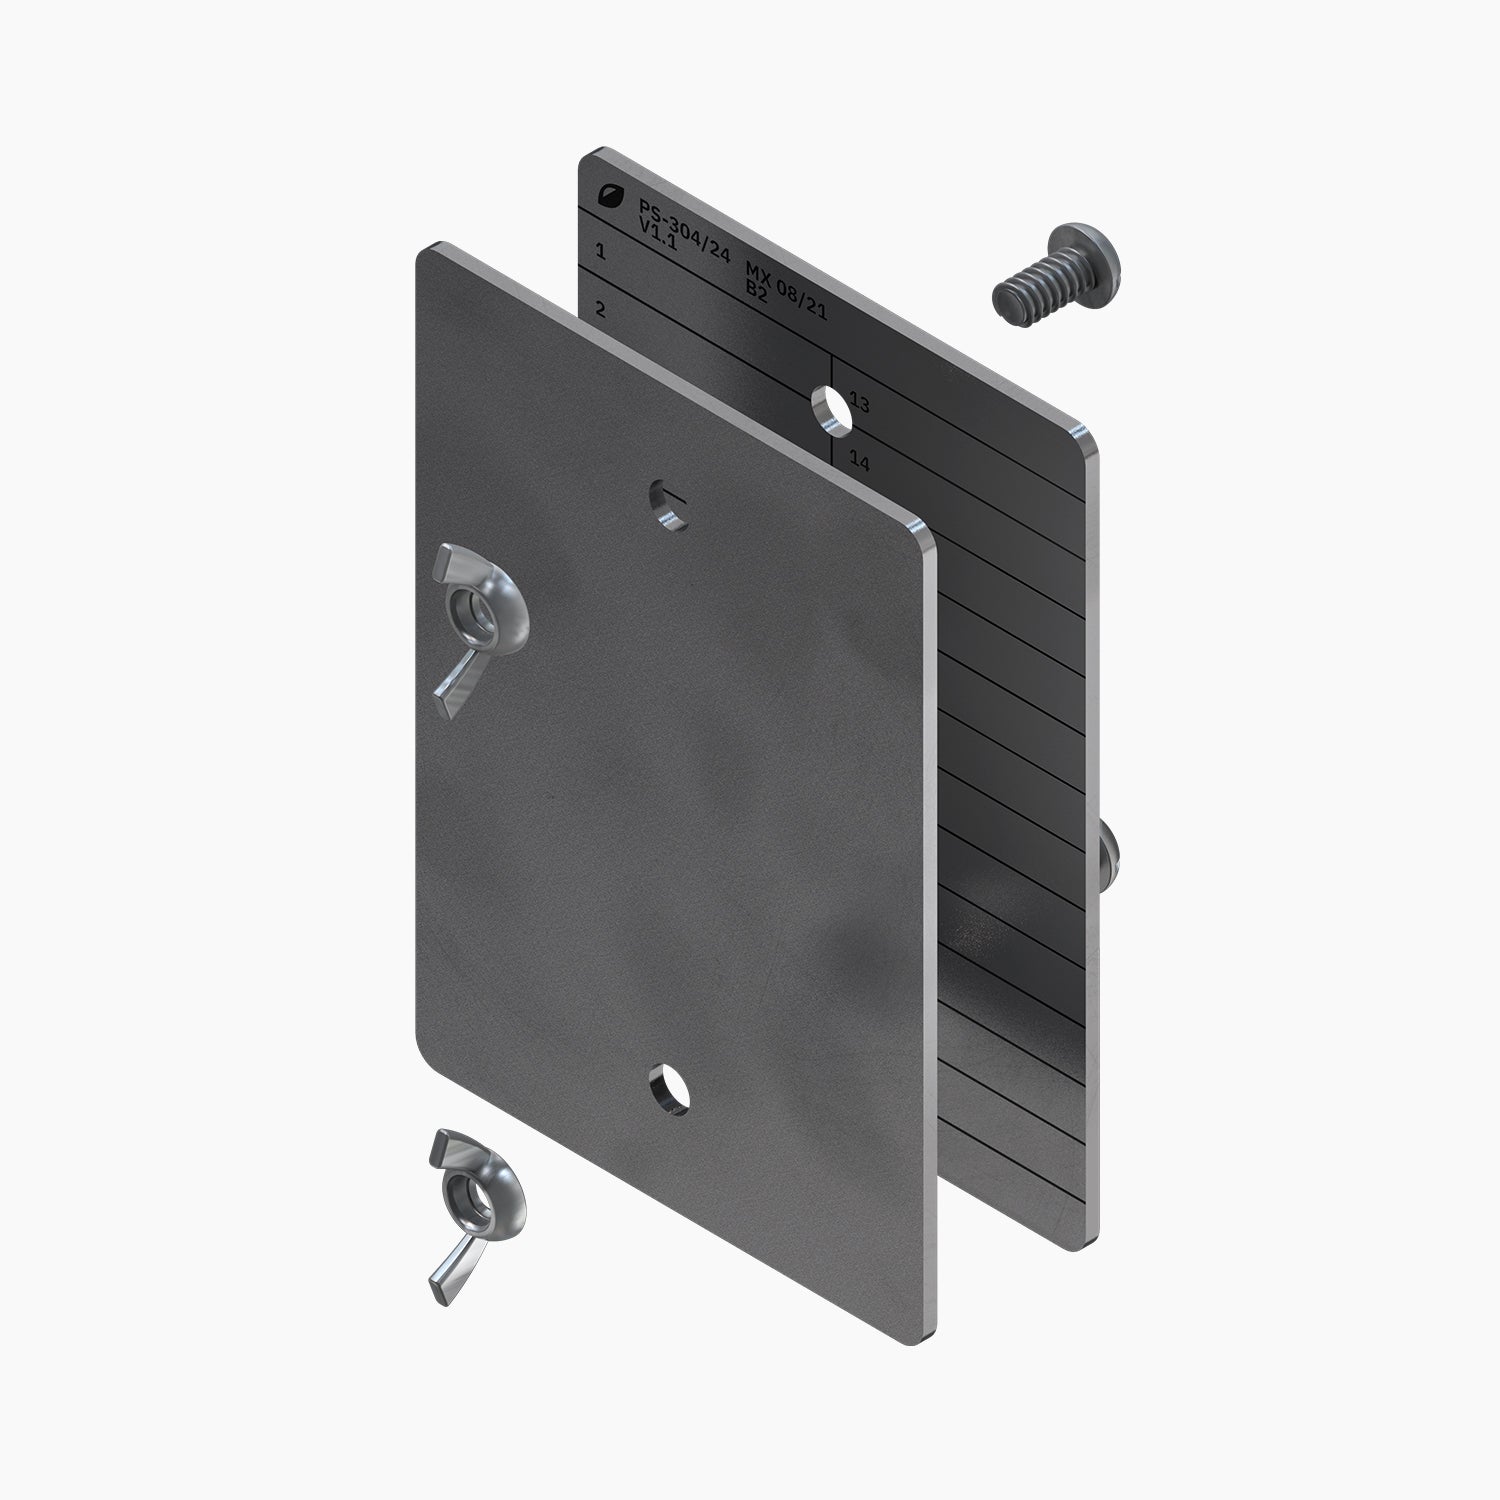 Vertical isometric exploded view of the stainless steel crypto backup Plate S by CryptoNumeris